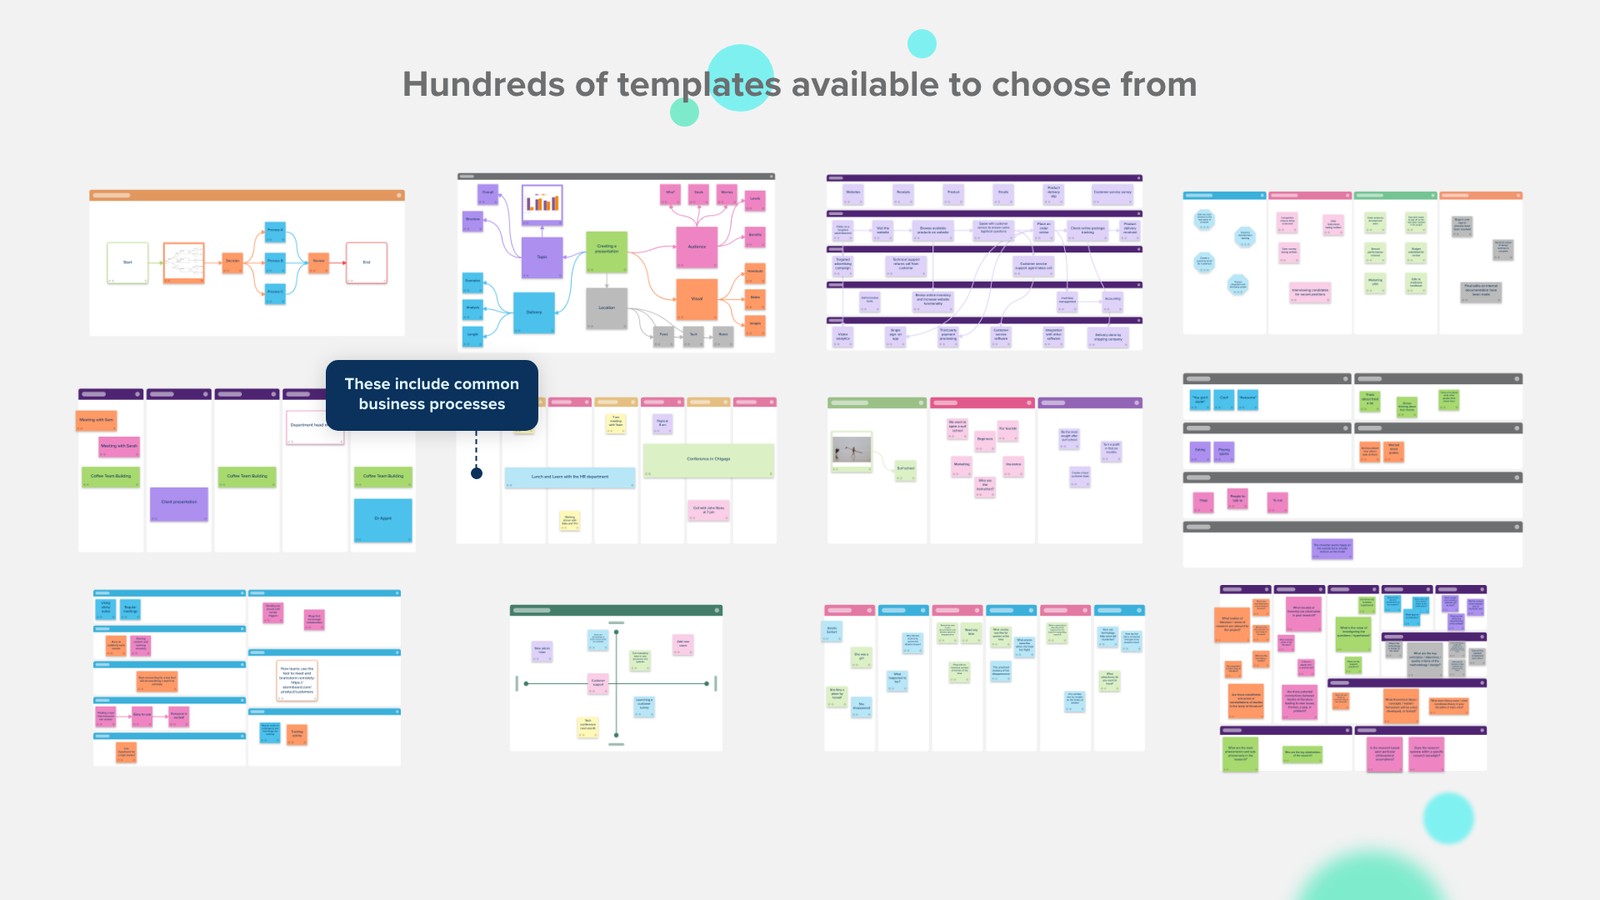 260+ pre-made templates available to choose from